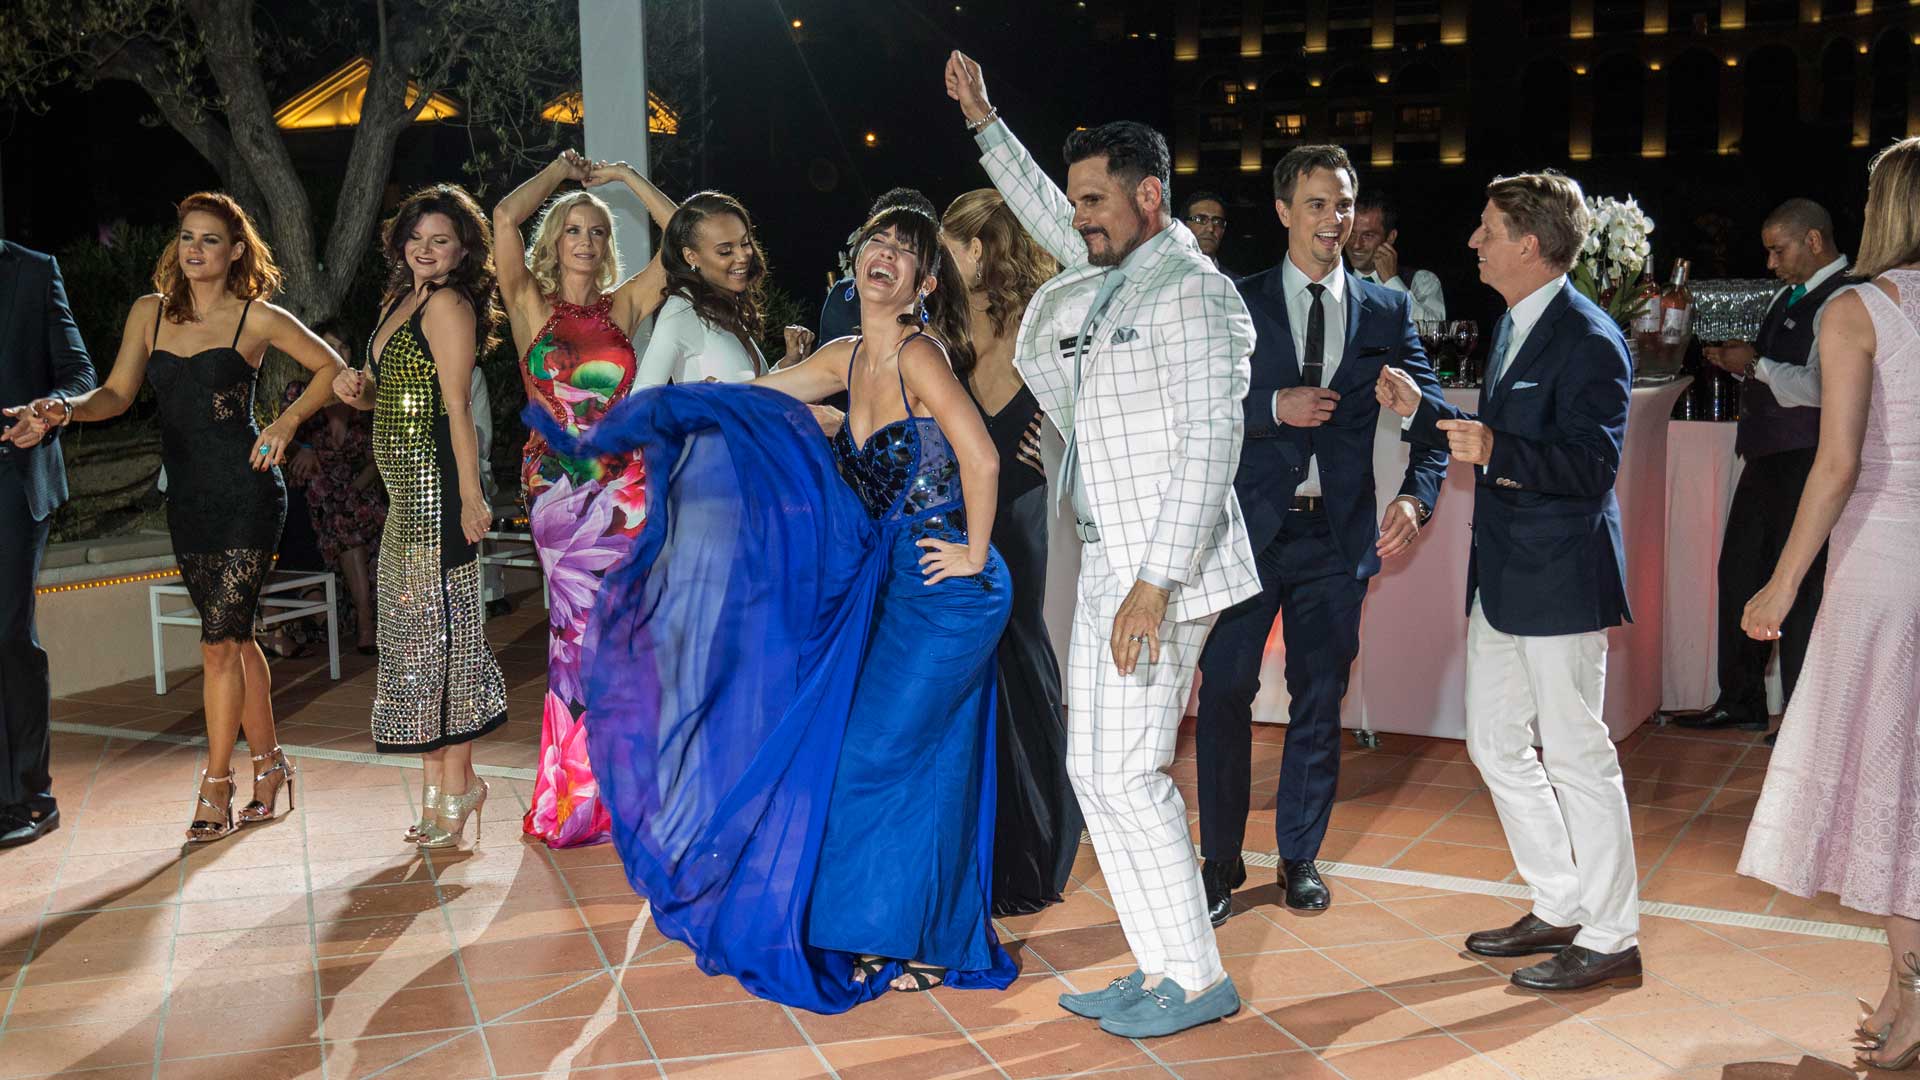 The cast of B&B cut loose when they hit the dance floor.